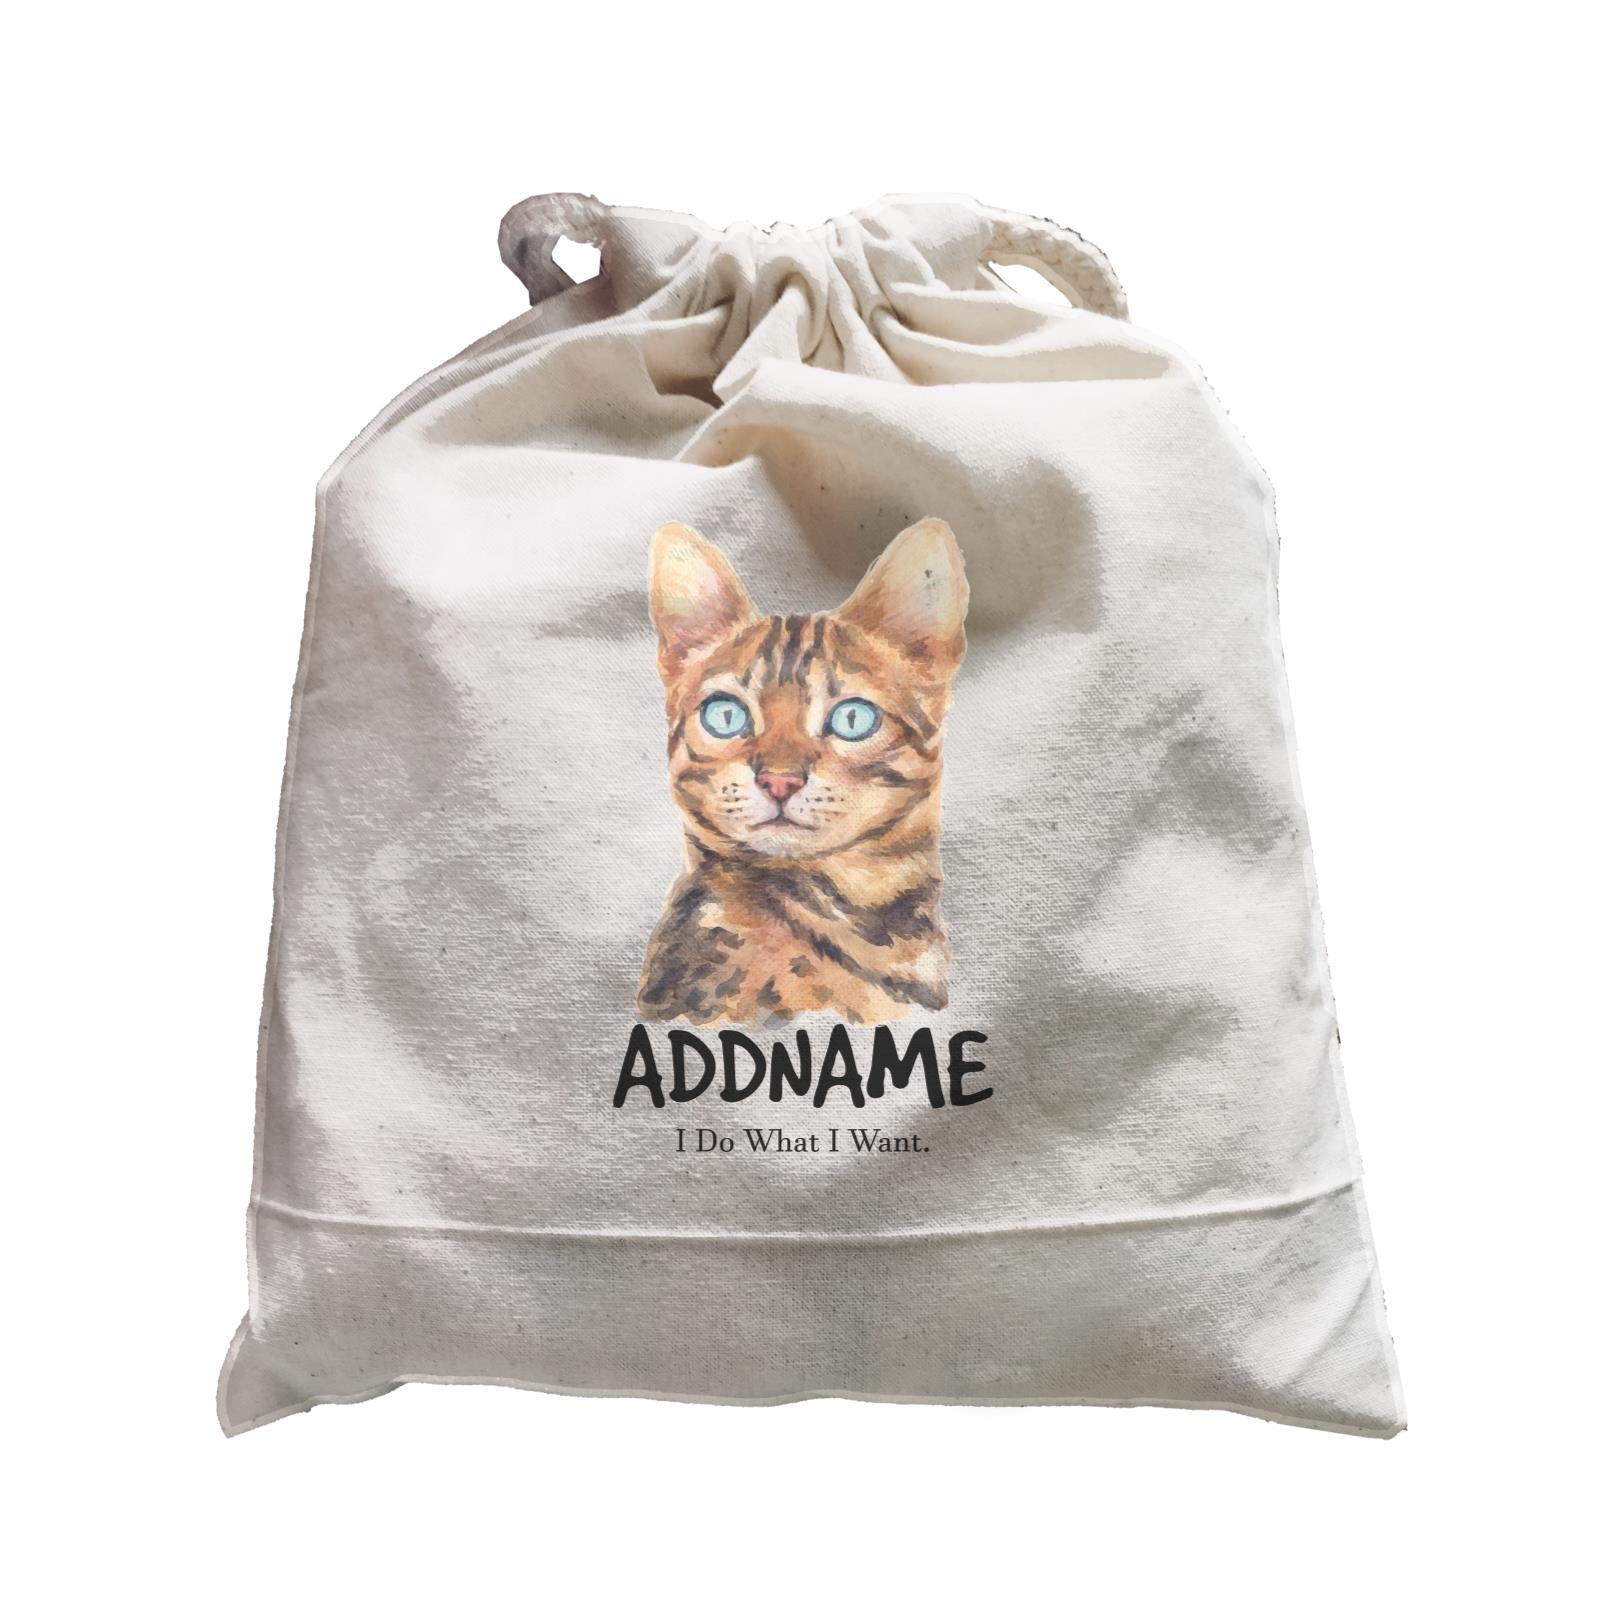 Watercolor Cat Bengal Cat I Do What I Want Addname Satchel